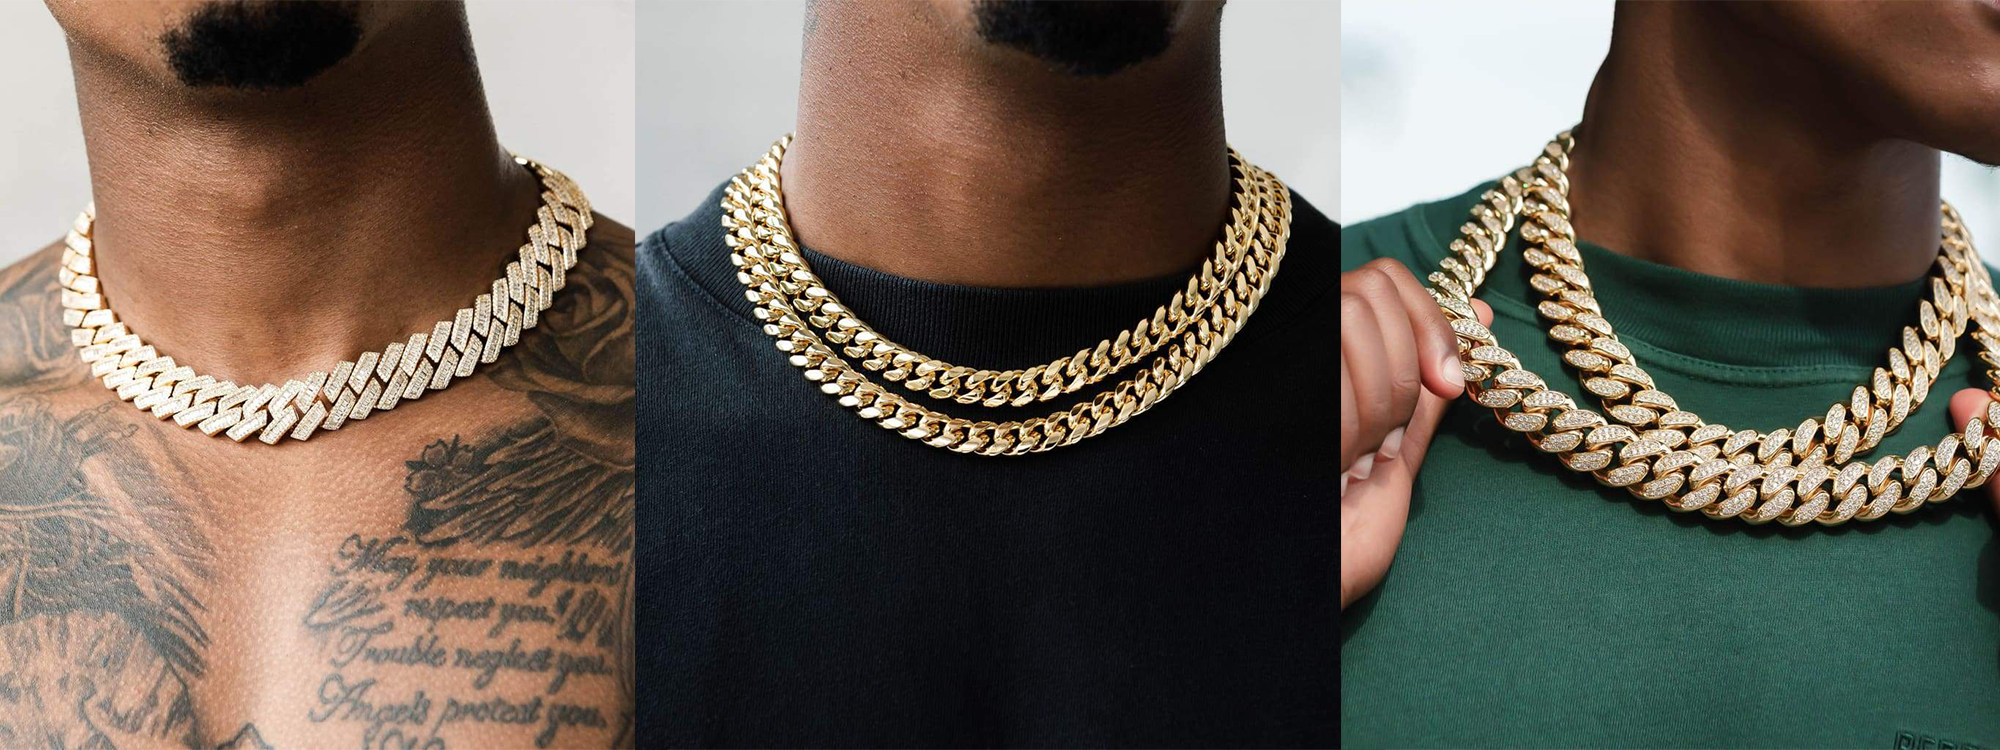 Where Can I Buy Real Gold Necklaces?